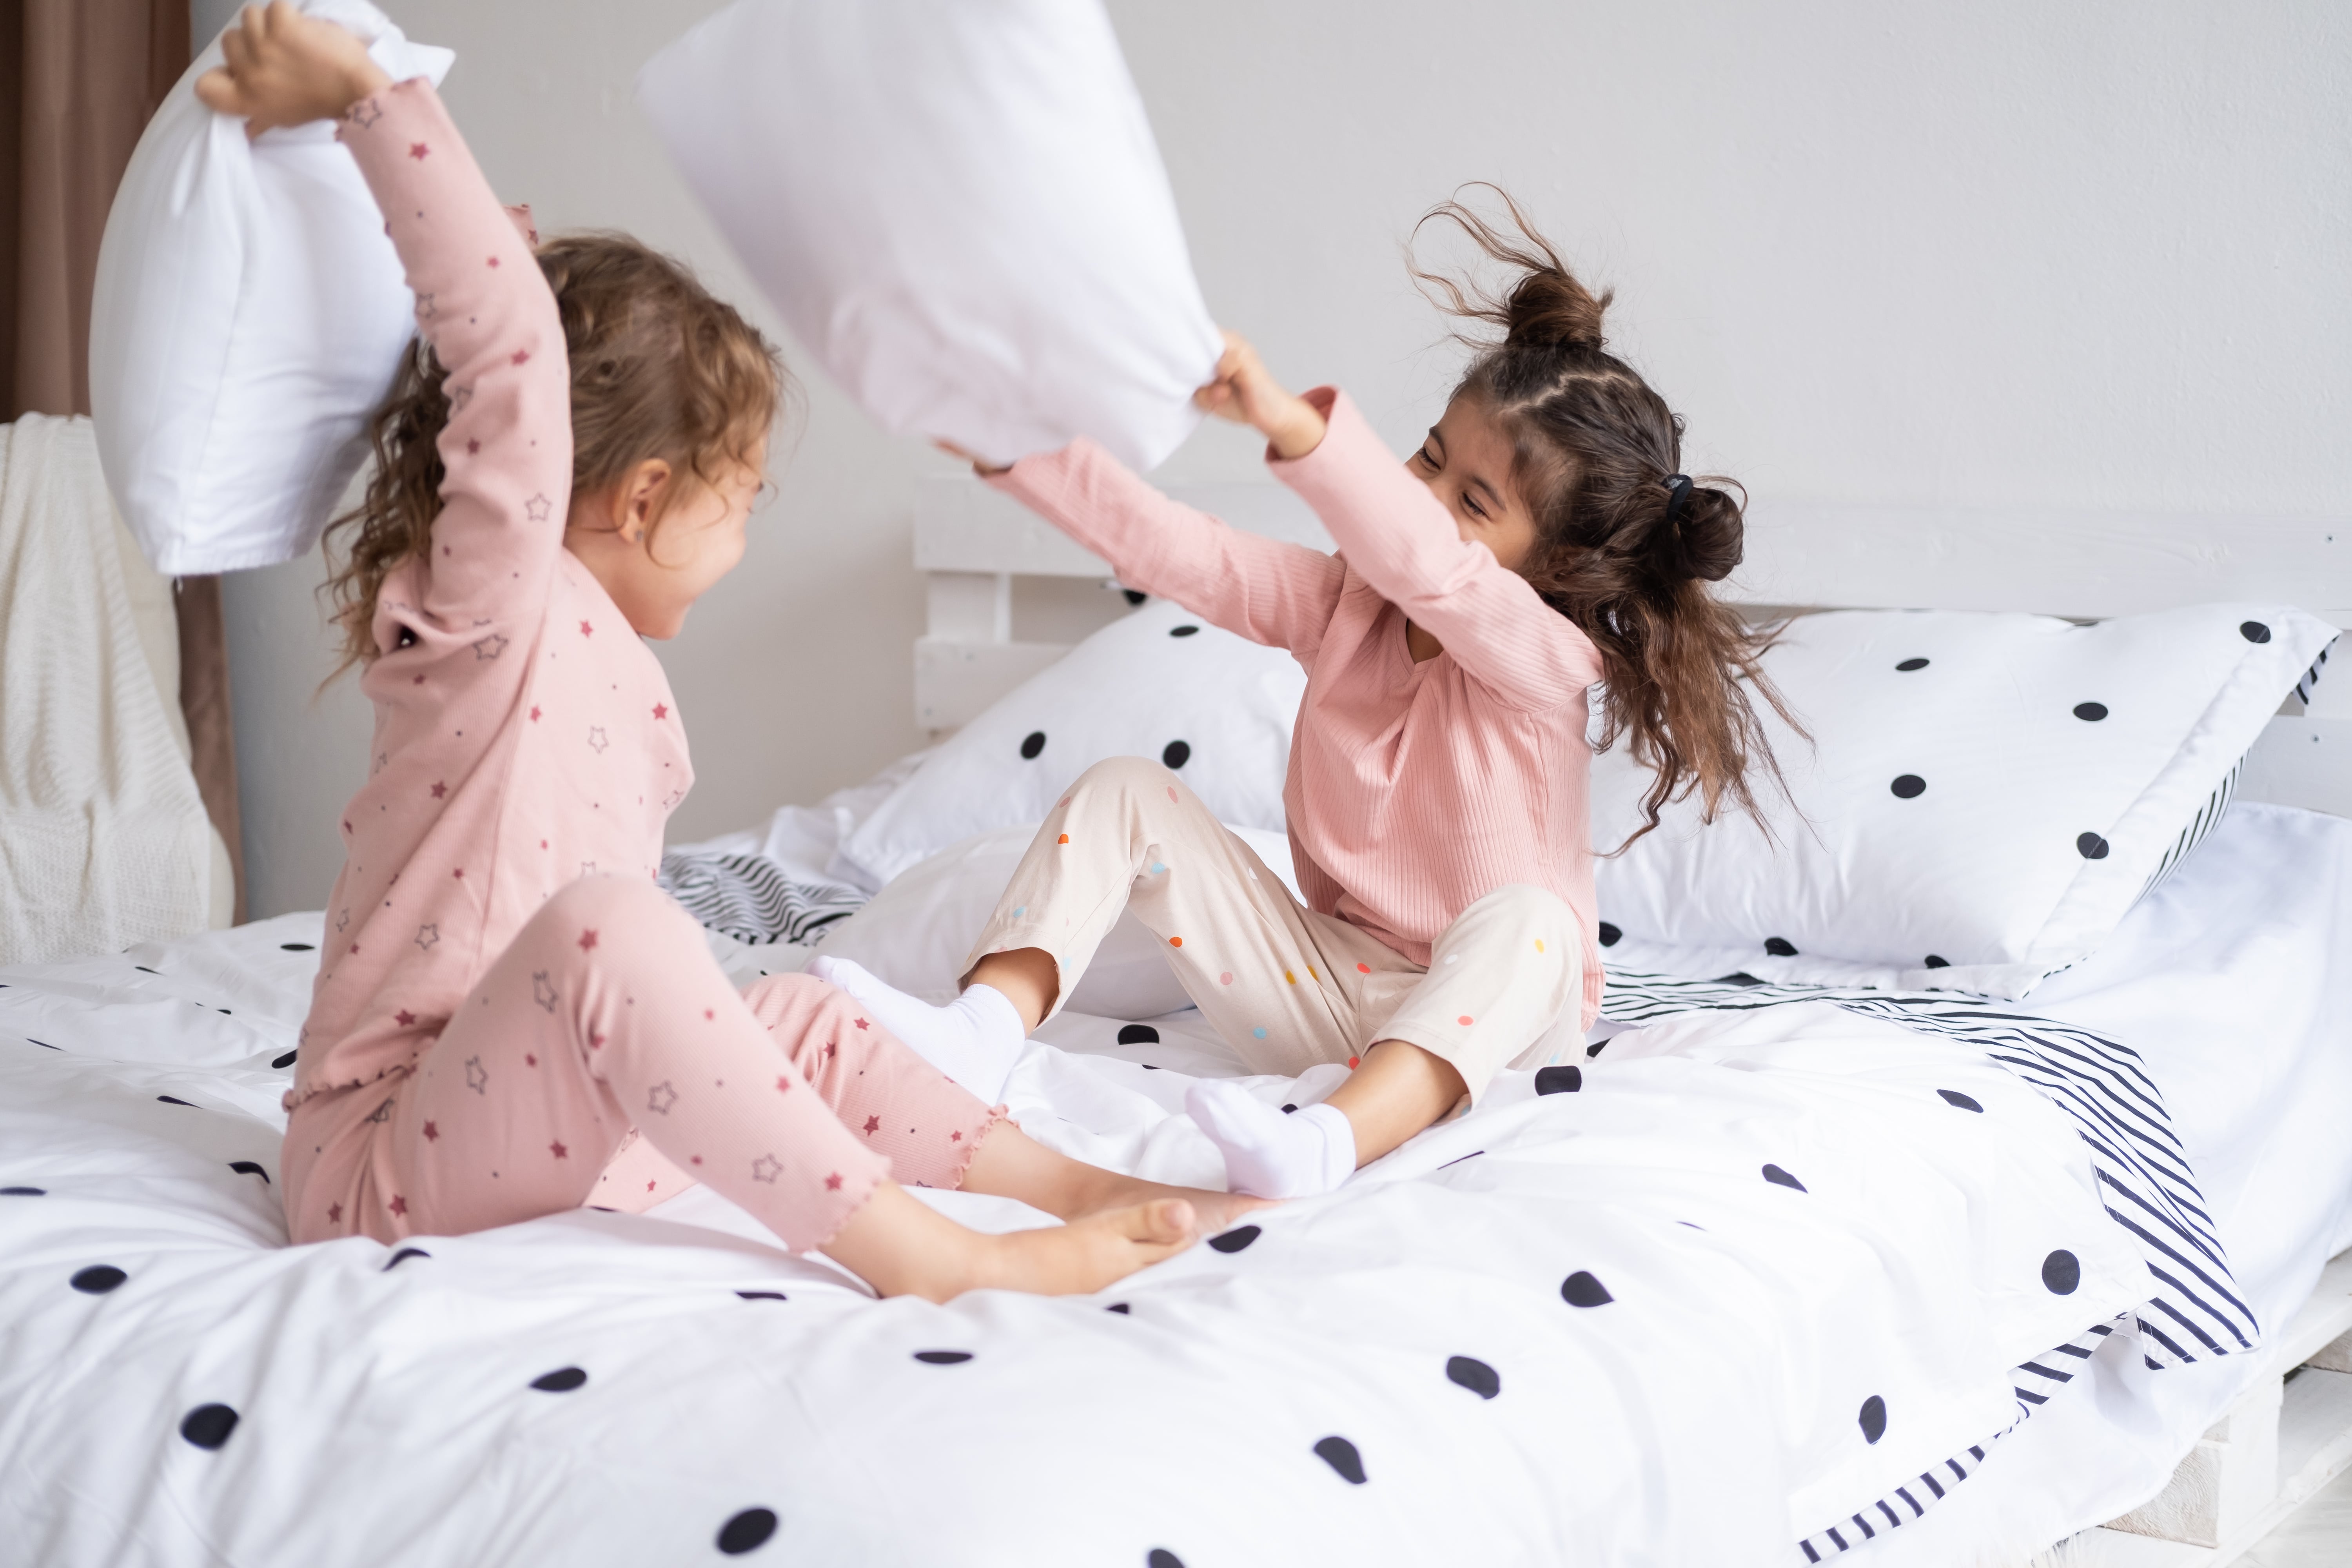 Two little girls in pink pyjamas having a pillow fight on a single bed dresses with a white and black polkadot bedding set.